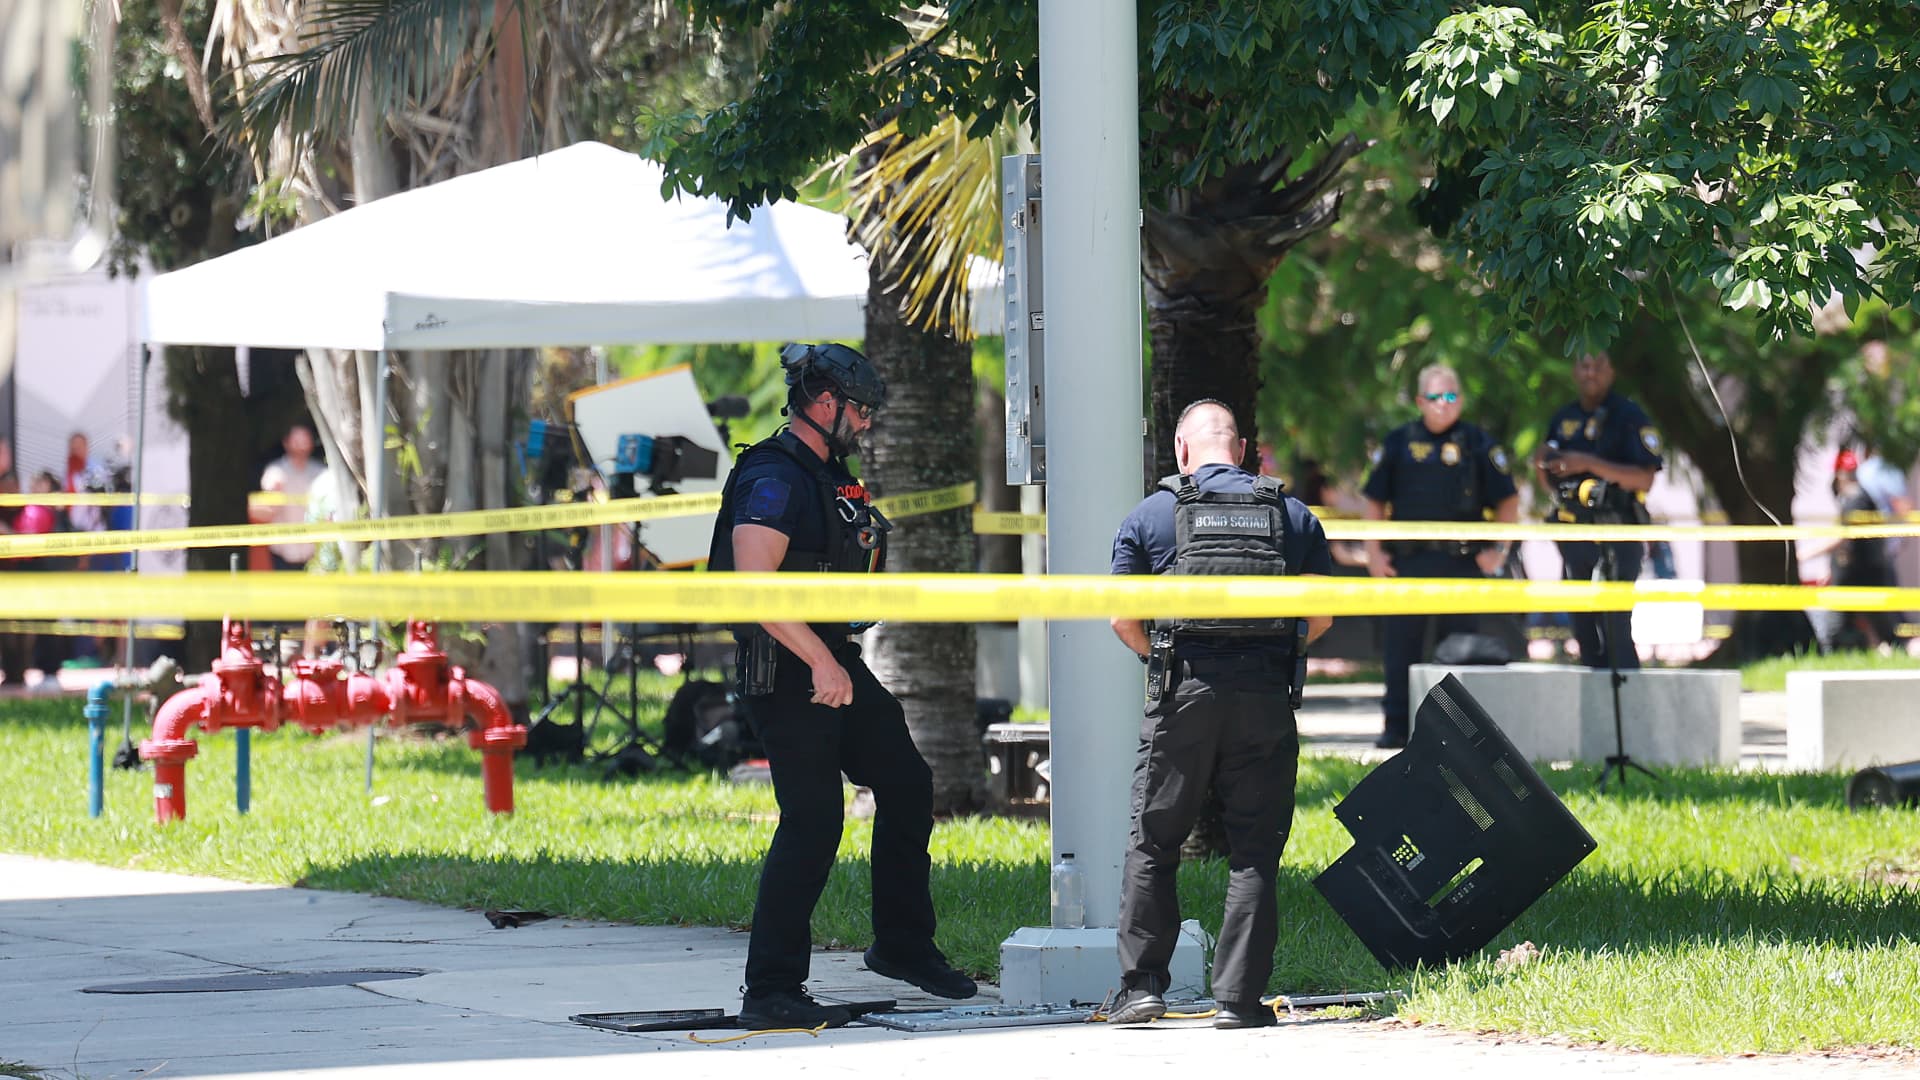 Miami Police investigate a suspicious item near the media area outside the Wilkie D. Ferguson Jr. United States Federal Courthouse where former President Donald Trump is scheduled to be arraigned later in the day on June 13, 2023 in Miami, Florida.